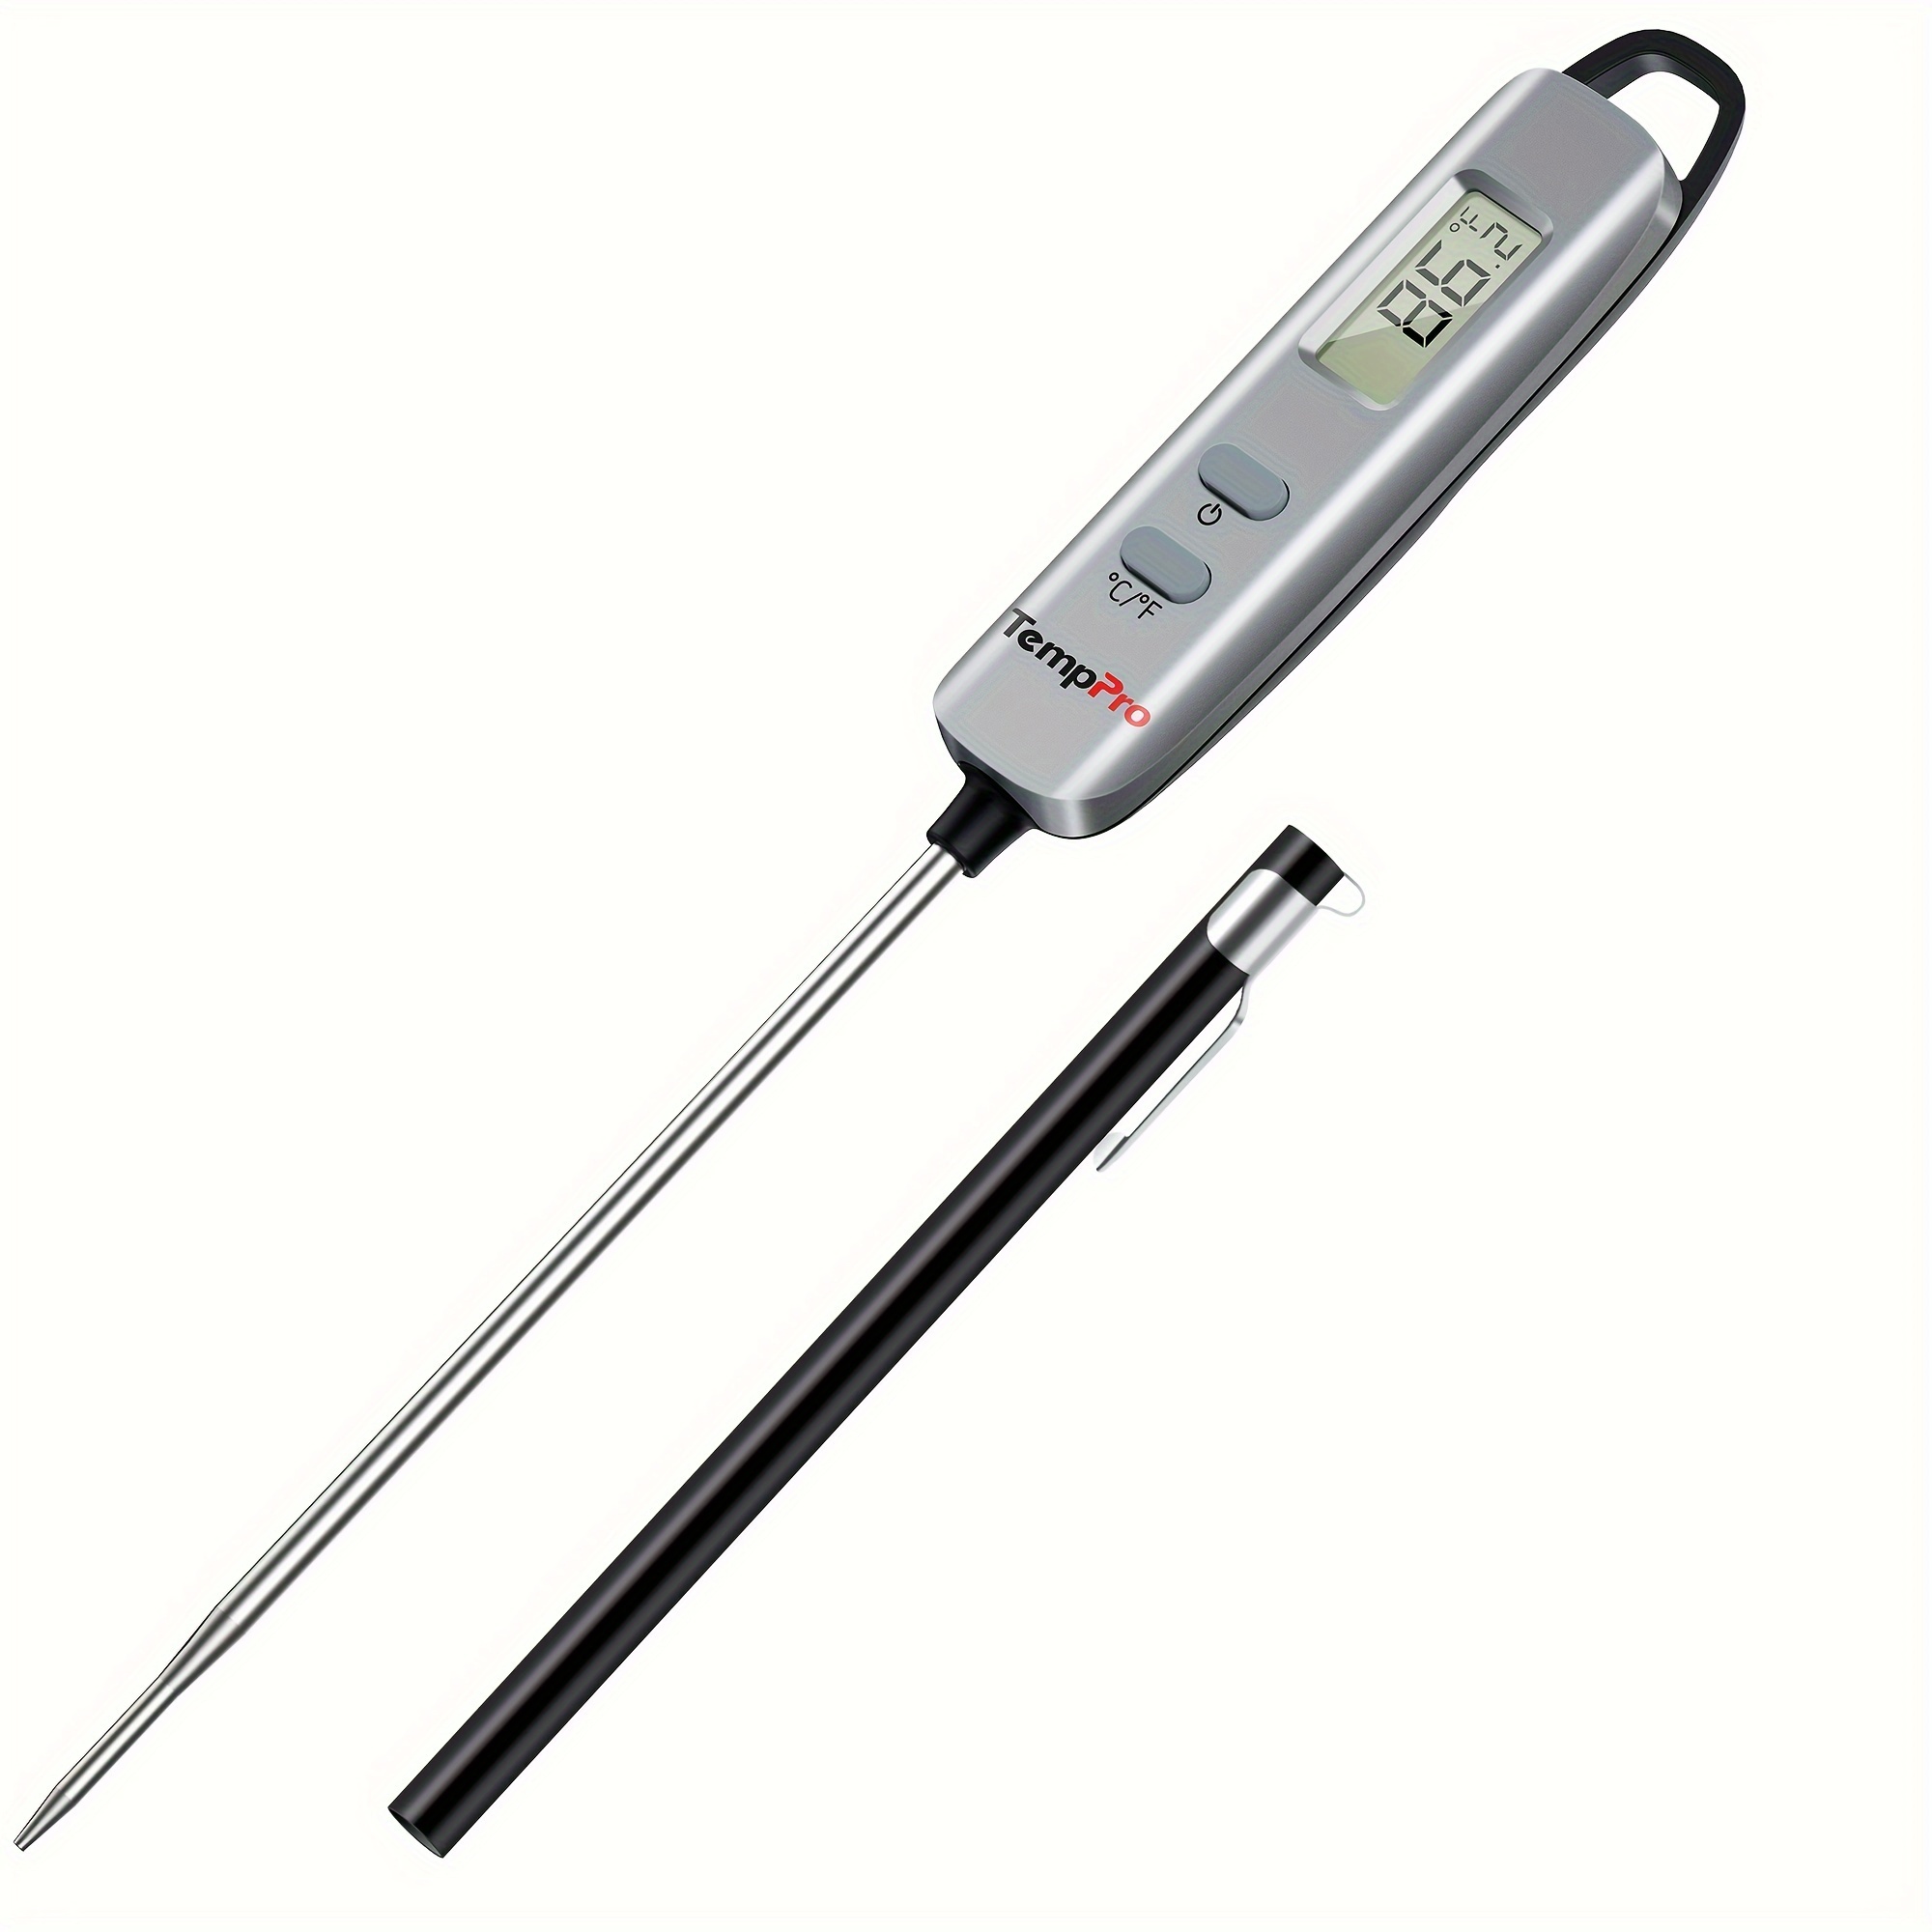 

Ic6016 Digital Meat Thermometer Instant Read Cooking Food Thermometer With Long Probe For Bbq Grill Oven Deep Fry Candy Kitchen Thermometer, Silver